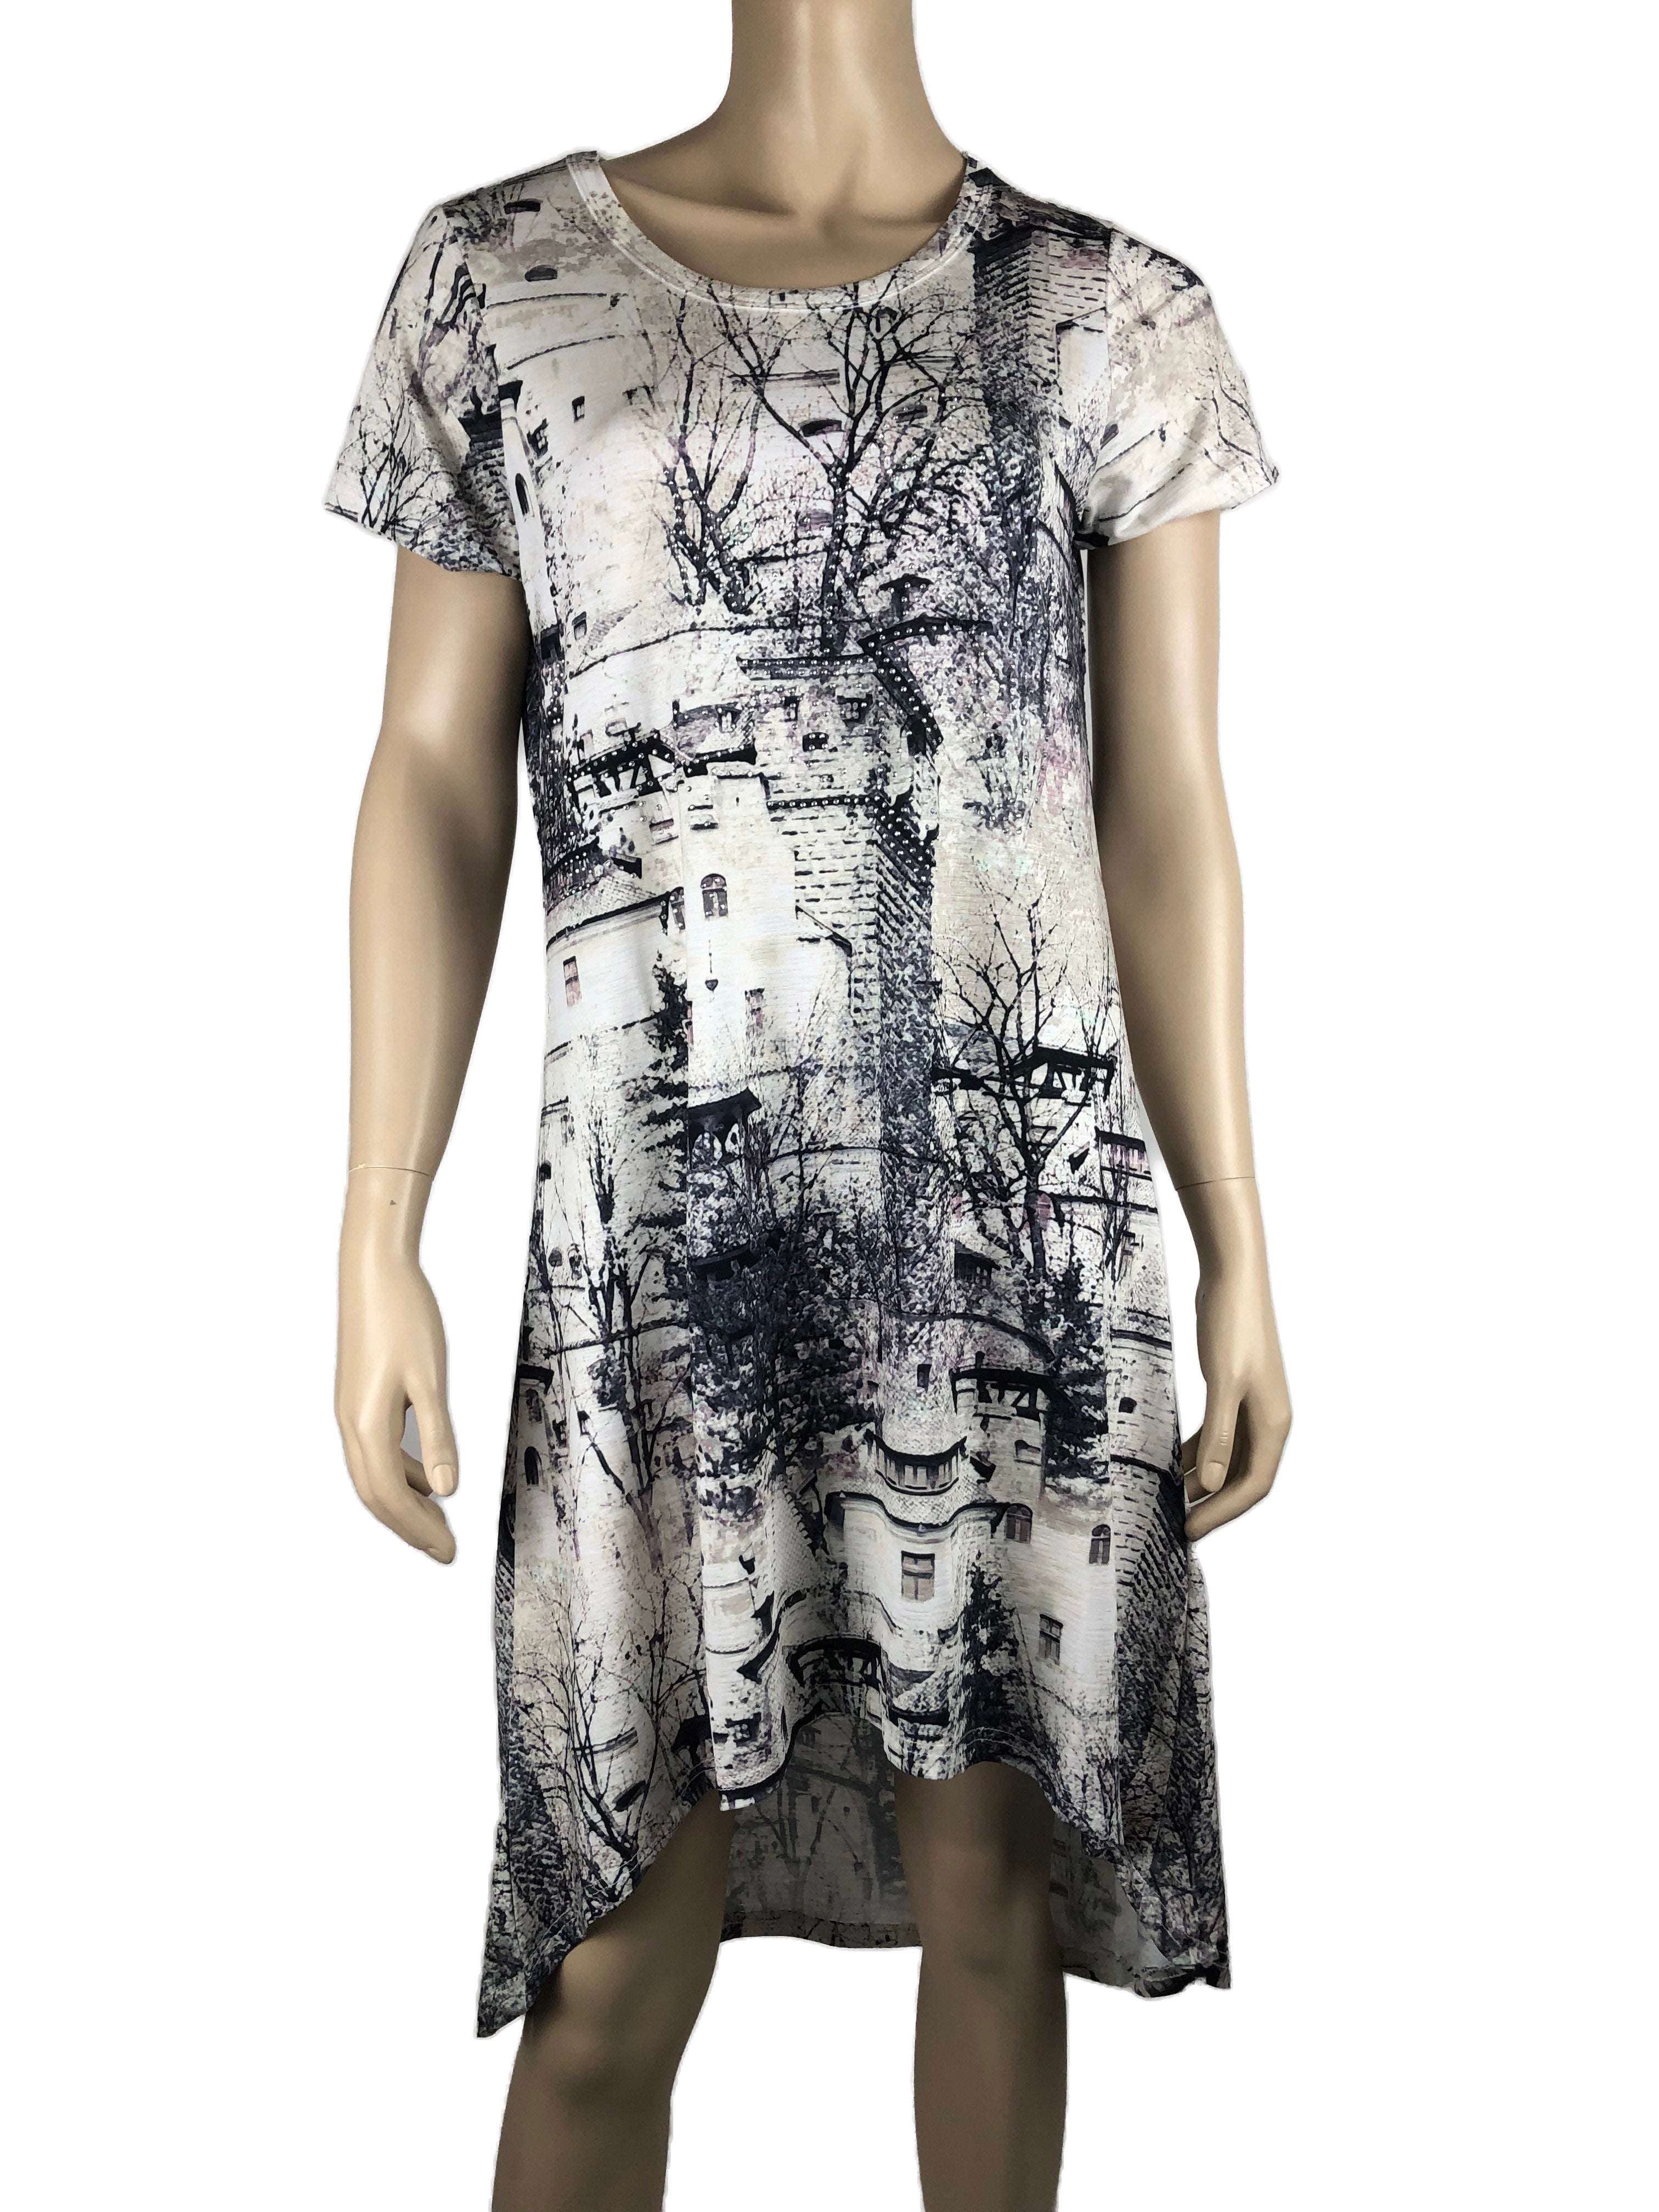 Women's Dresses on Sale Summer Dress Quality Stretch Fabric Now 50 Off Yvonne Marie Boutiques - Yvonne Marie - Yvonne Marie